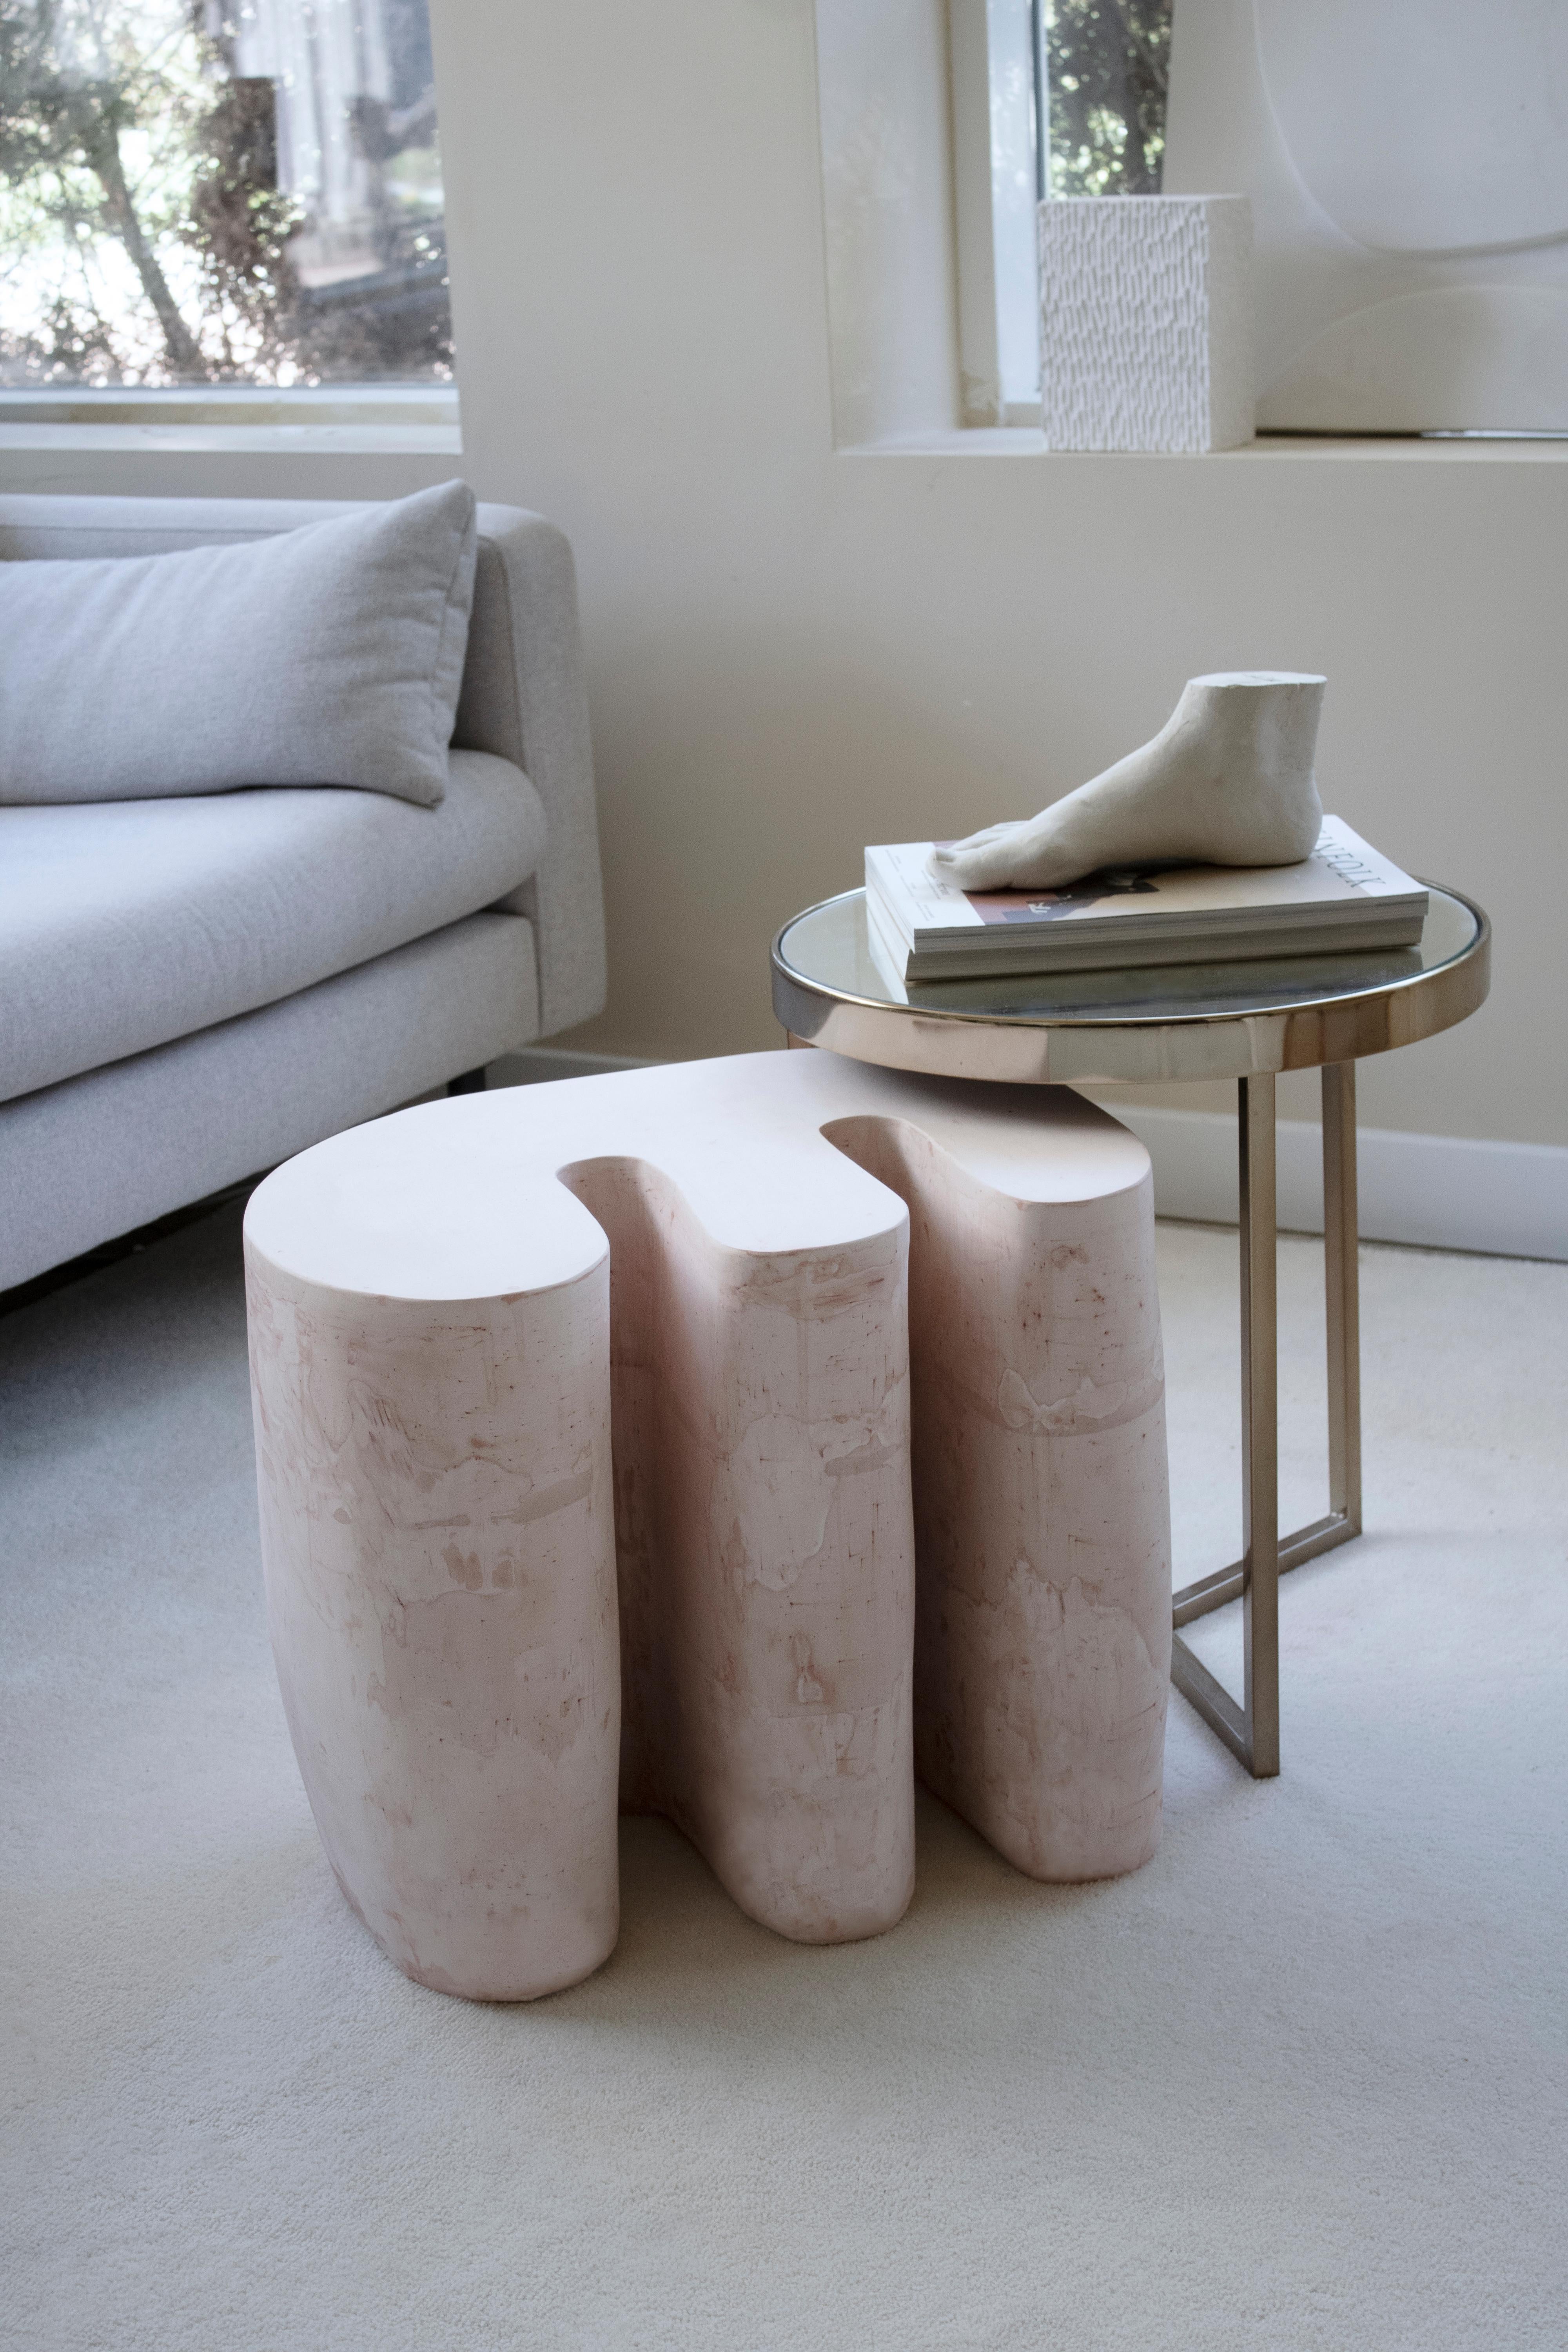 Organic Table by AOAO
Dimensions: W 48 x D 38 x H 40 cm
Materials: Light Pink Plaster
Color options available upon request.

The idea was born after deciding to reconnect with my family and my grandfather – a sculptor artist. Learning to sculpt and